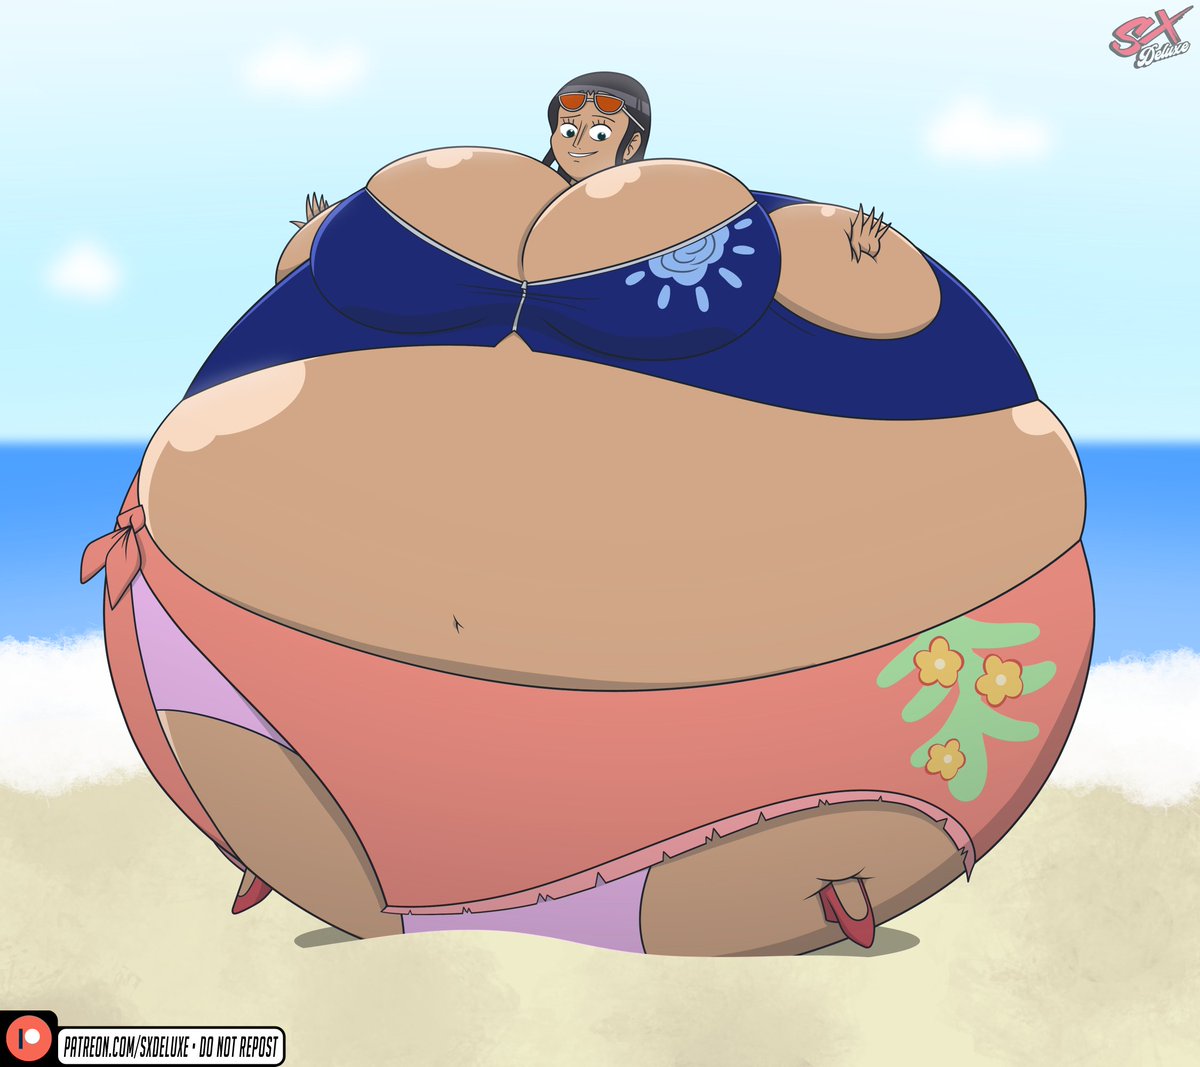 Nothing like a relaxing day at the beach to work on your tan. Also become a giant beachball too, I guess.